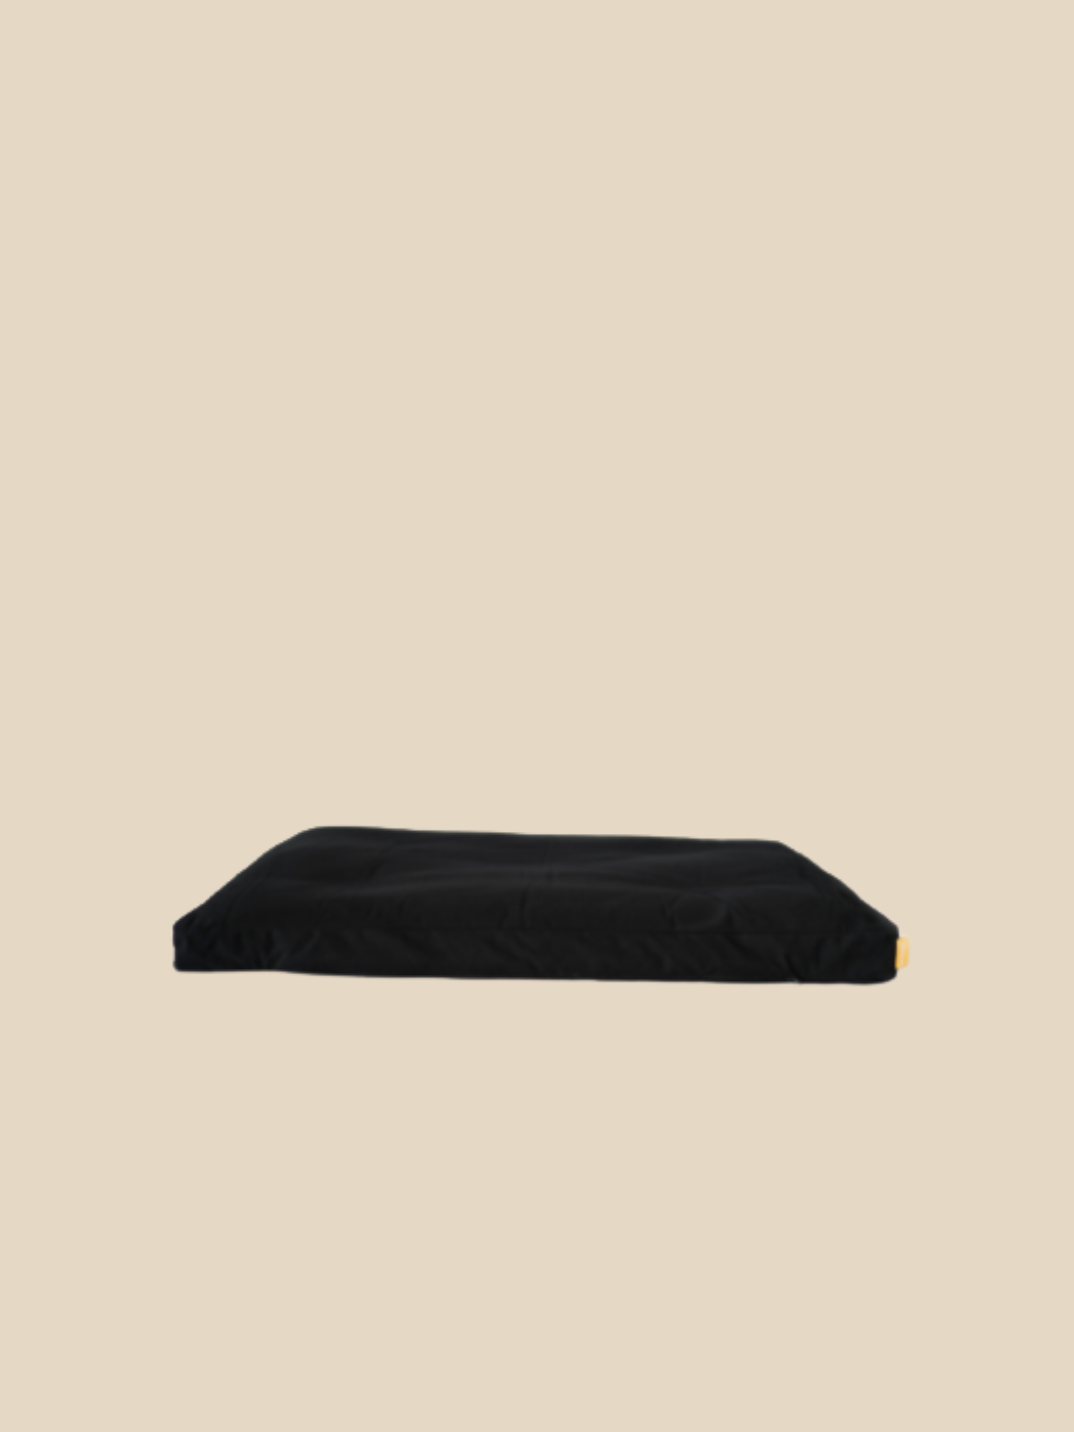 The Zabuton meditation cushion is the perfect foundation for your Zafu or Halfmoon Cushion. It provides essential support and cushioning for your ankles and knees when sitting lotus posed or kneeling in zen style.  Shop eco-friendly home. Sustainable brands